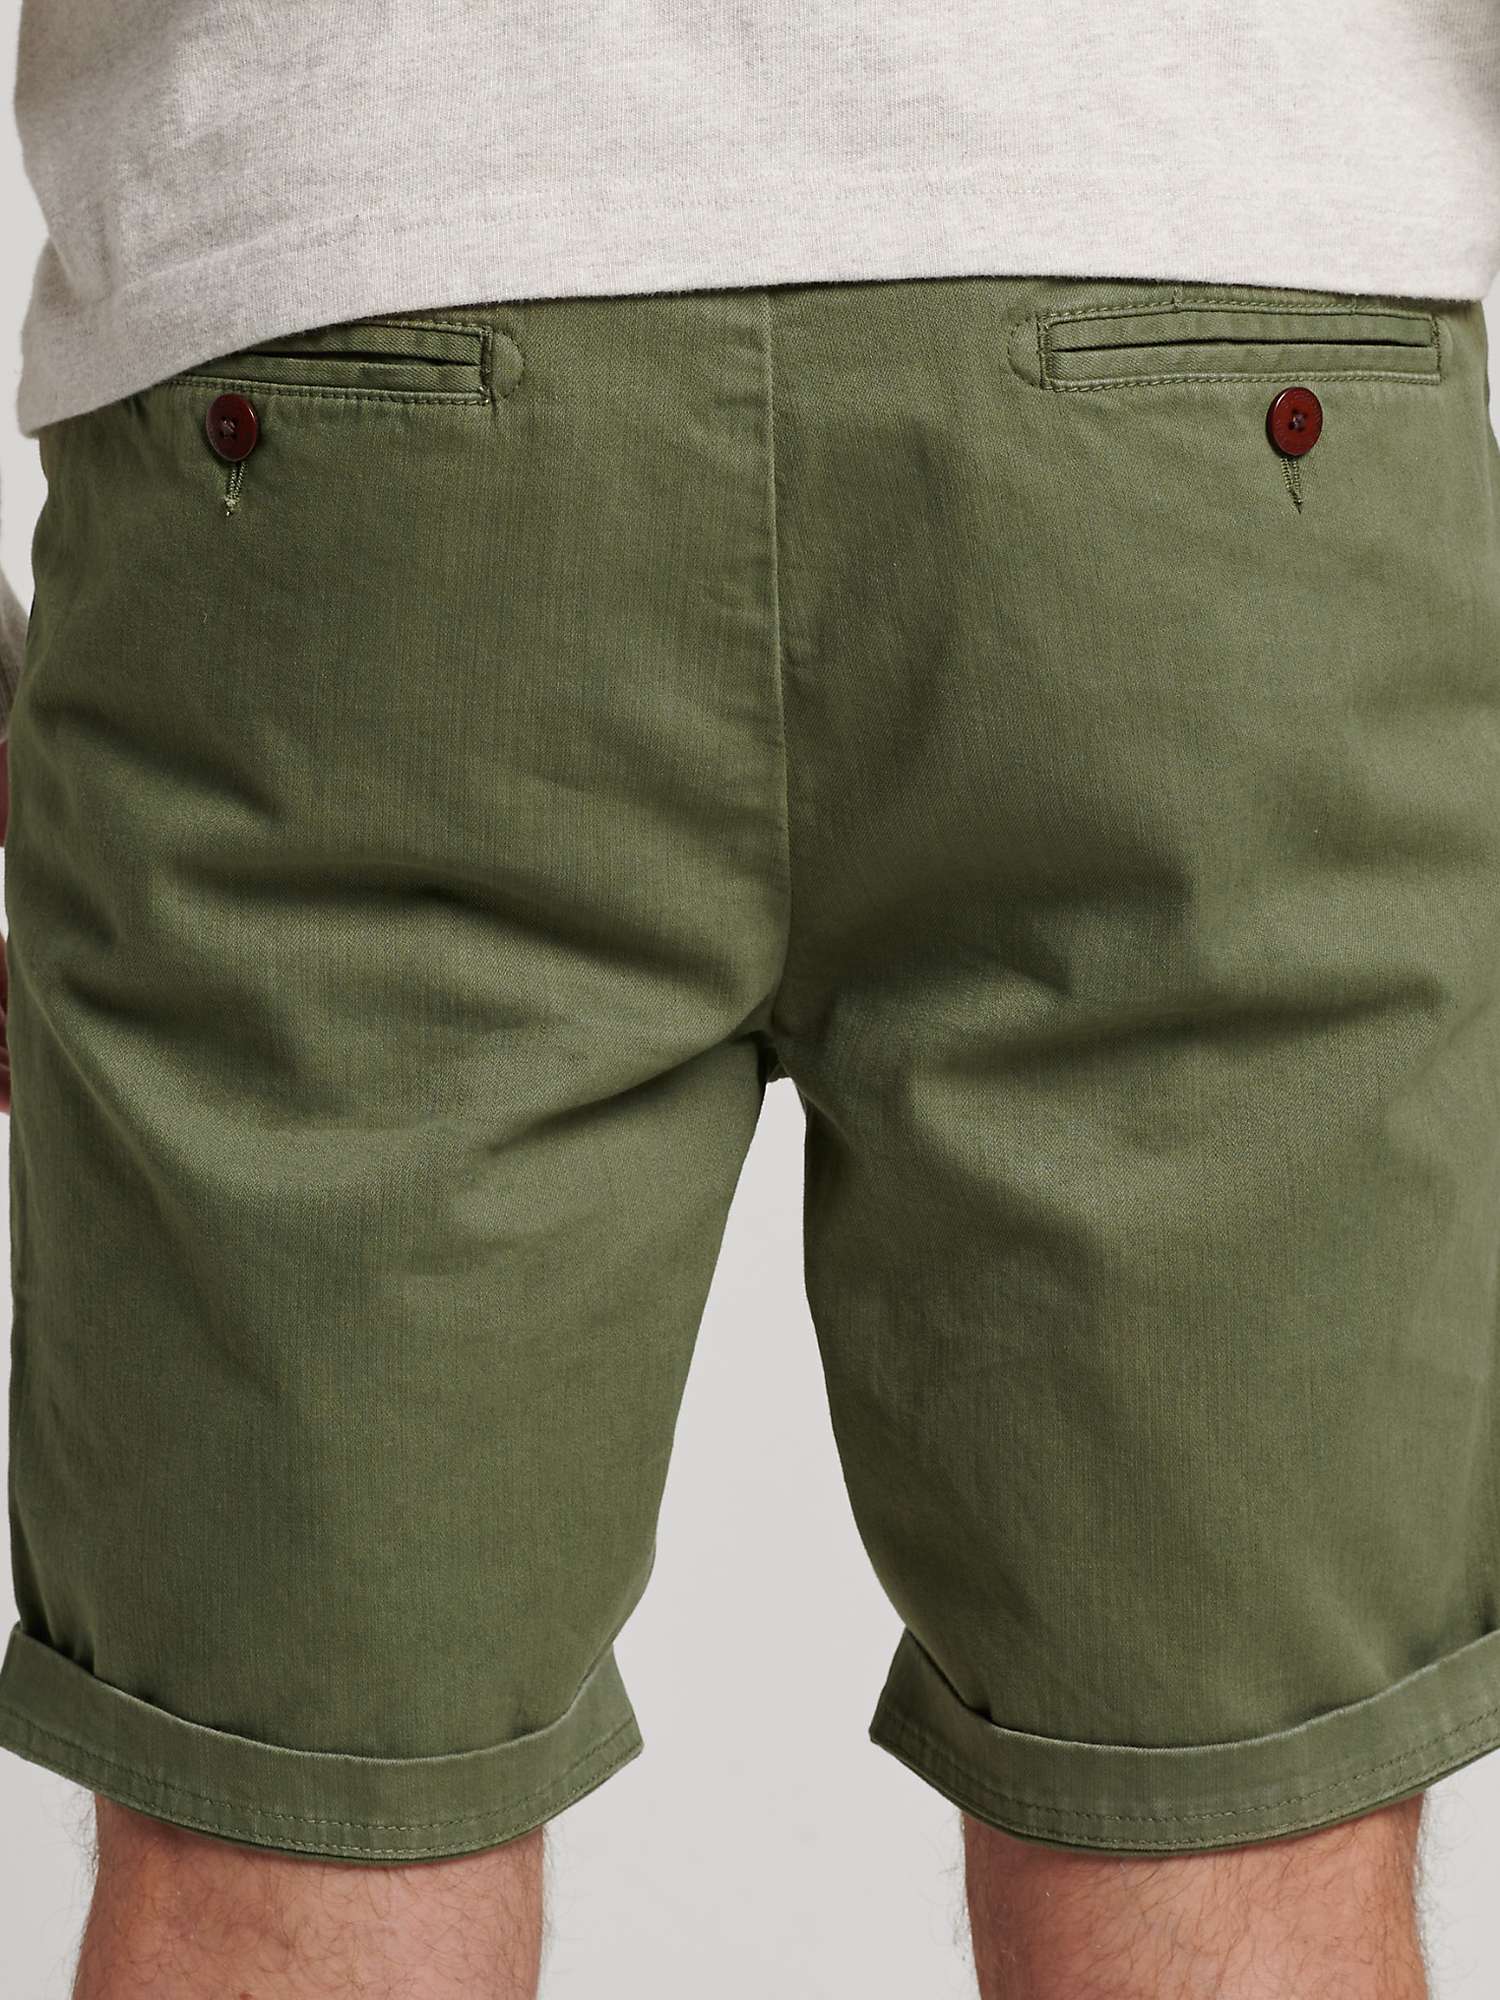 Buy Superdry Officer Chino Shorts Online at johnlewis.com